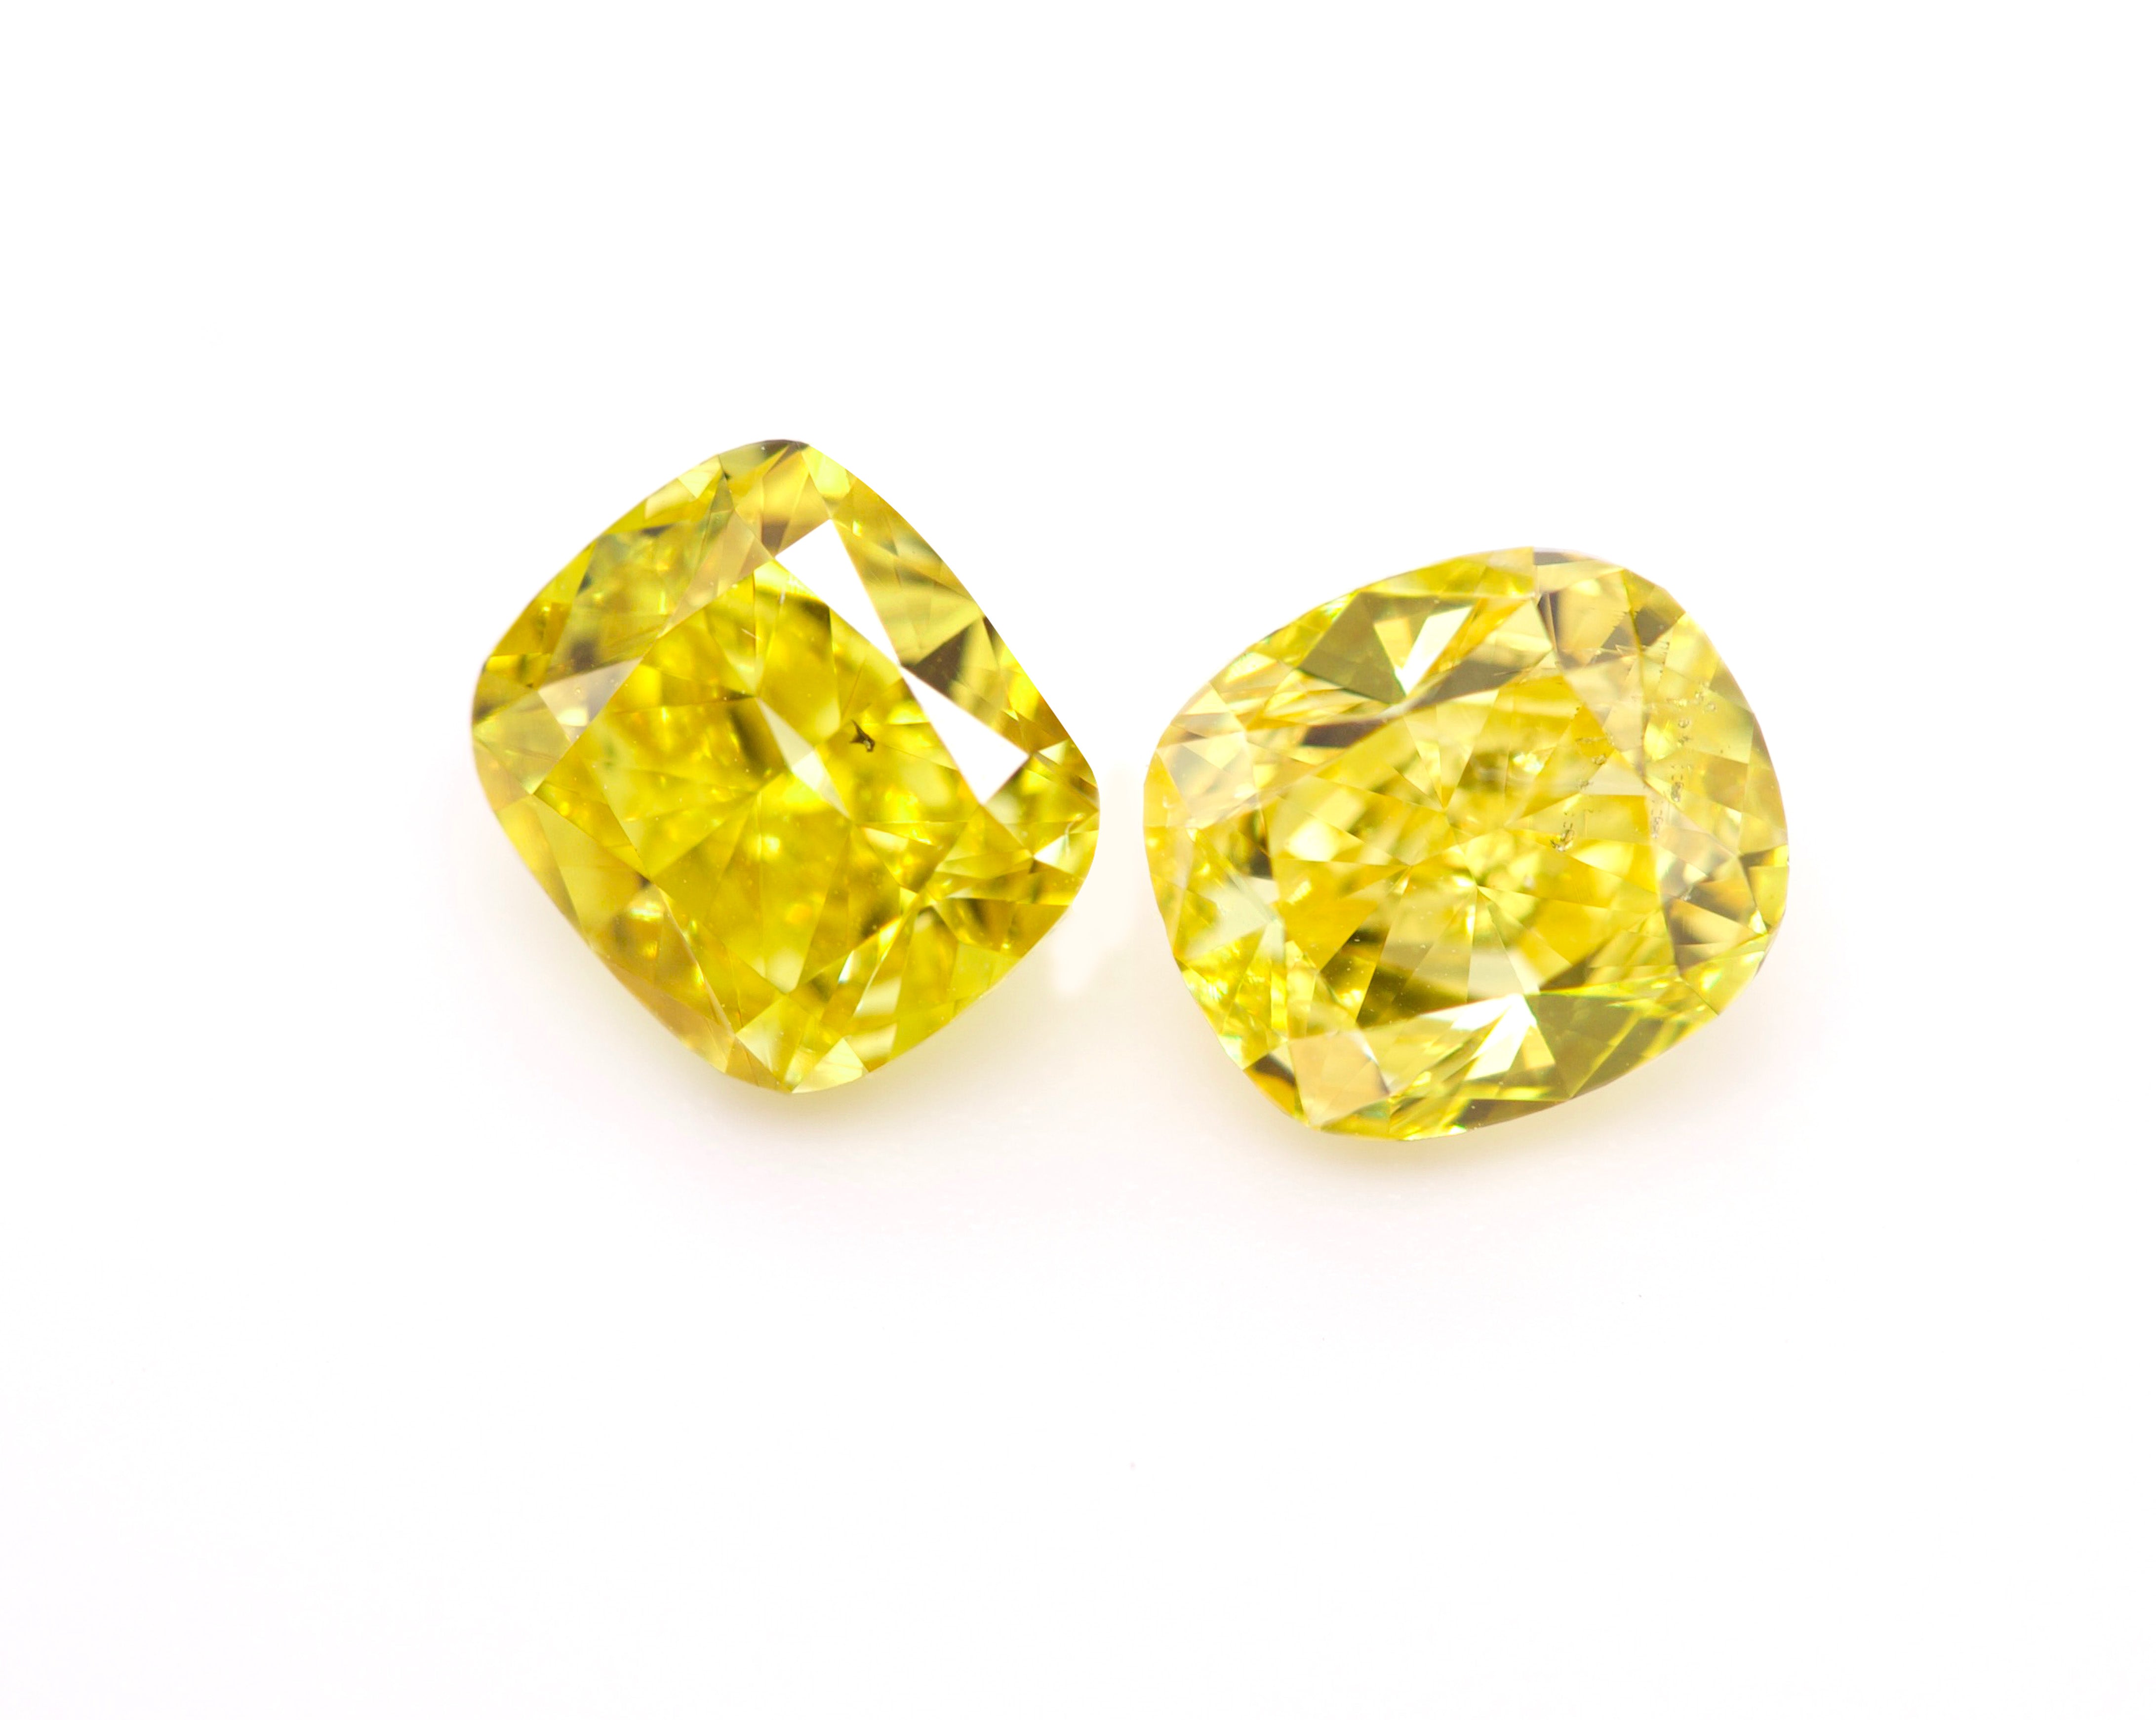 ancy Vivid Yellow diamonds from Langerman Diamonds of 1.00 ct each with GIA certificate